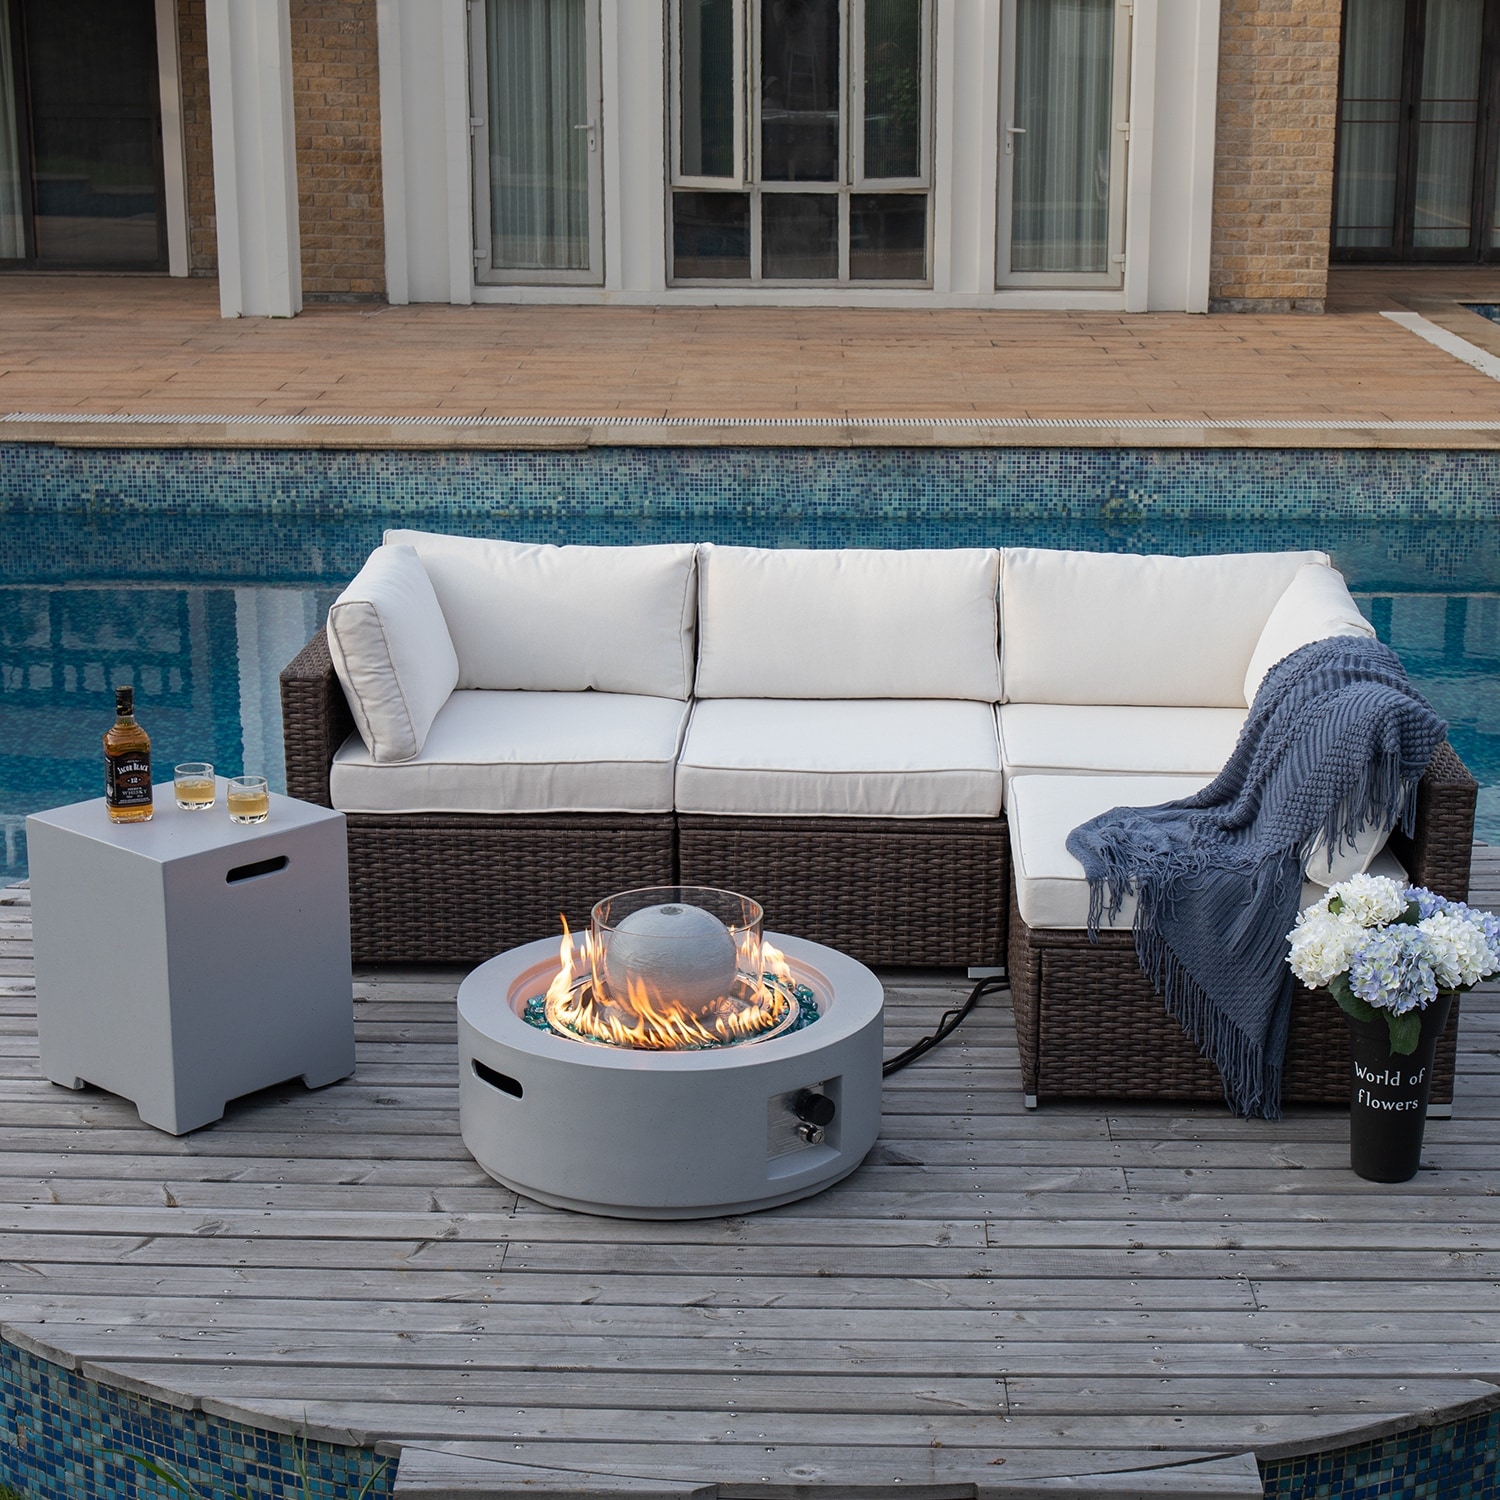 Cosiest Outdoor Patio Wicker Furniture Set W Fire And Water Fountain